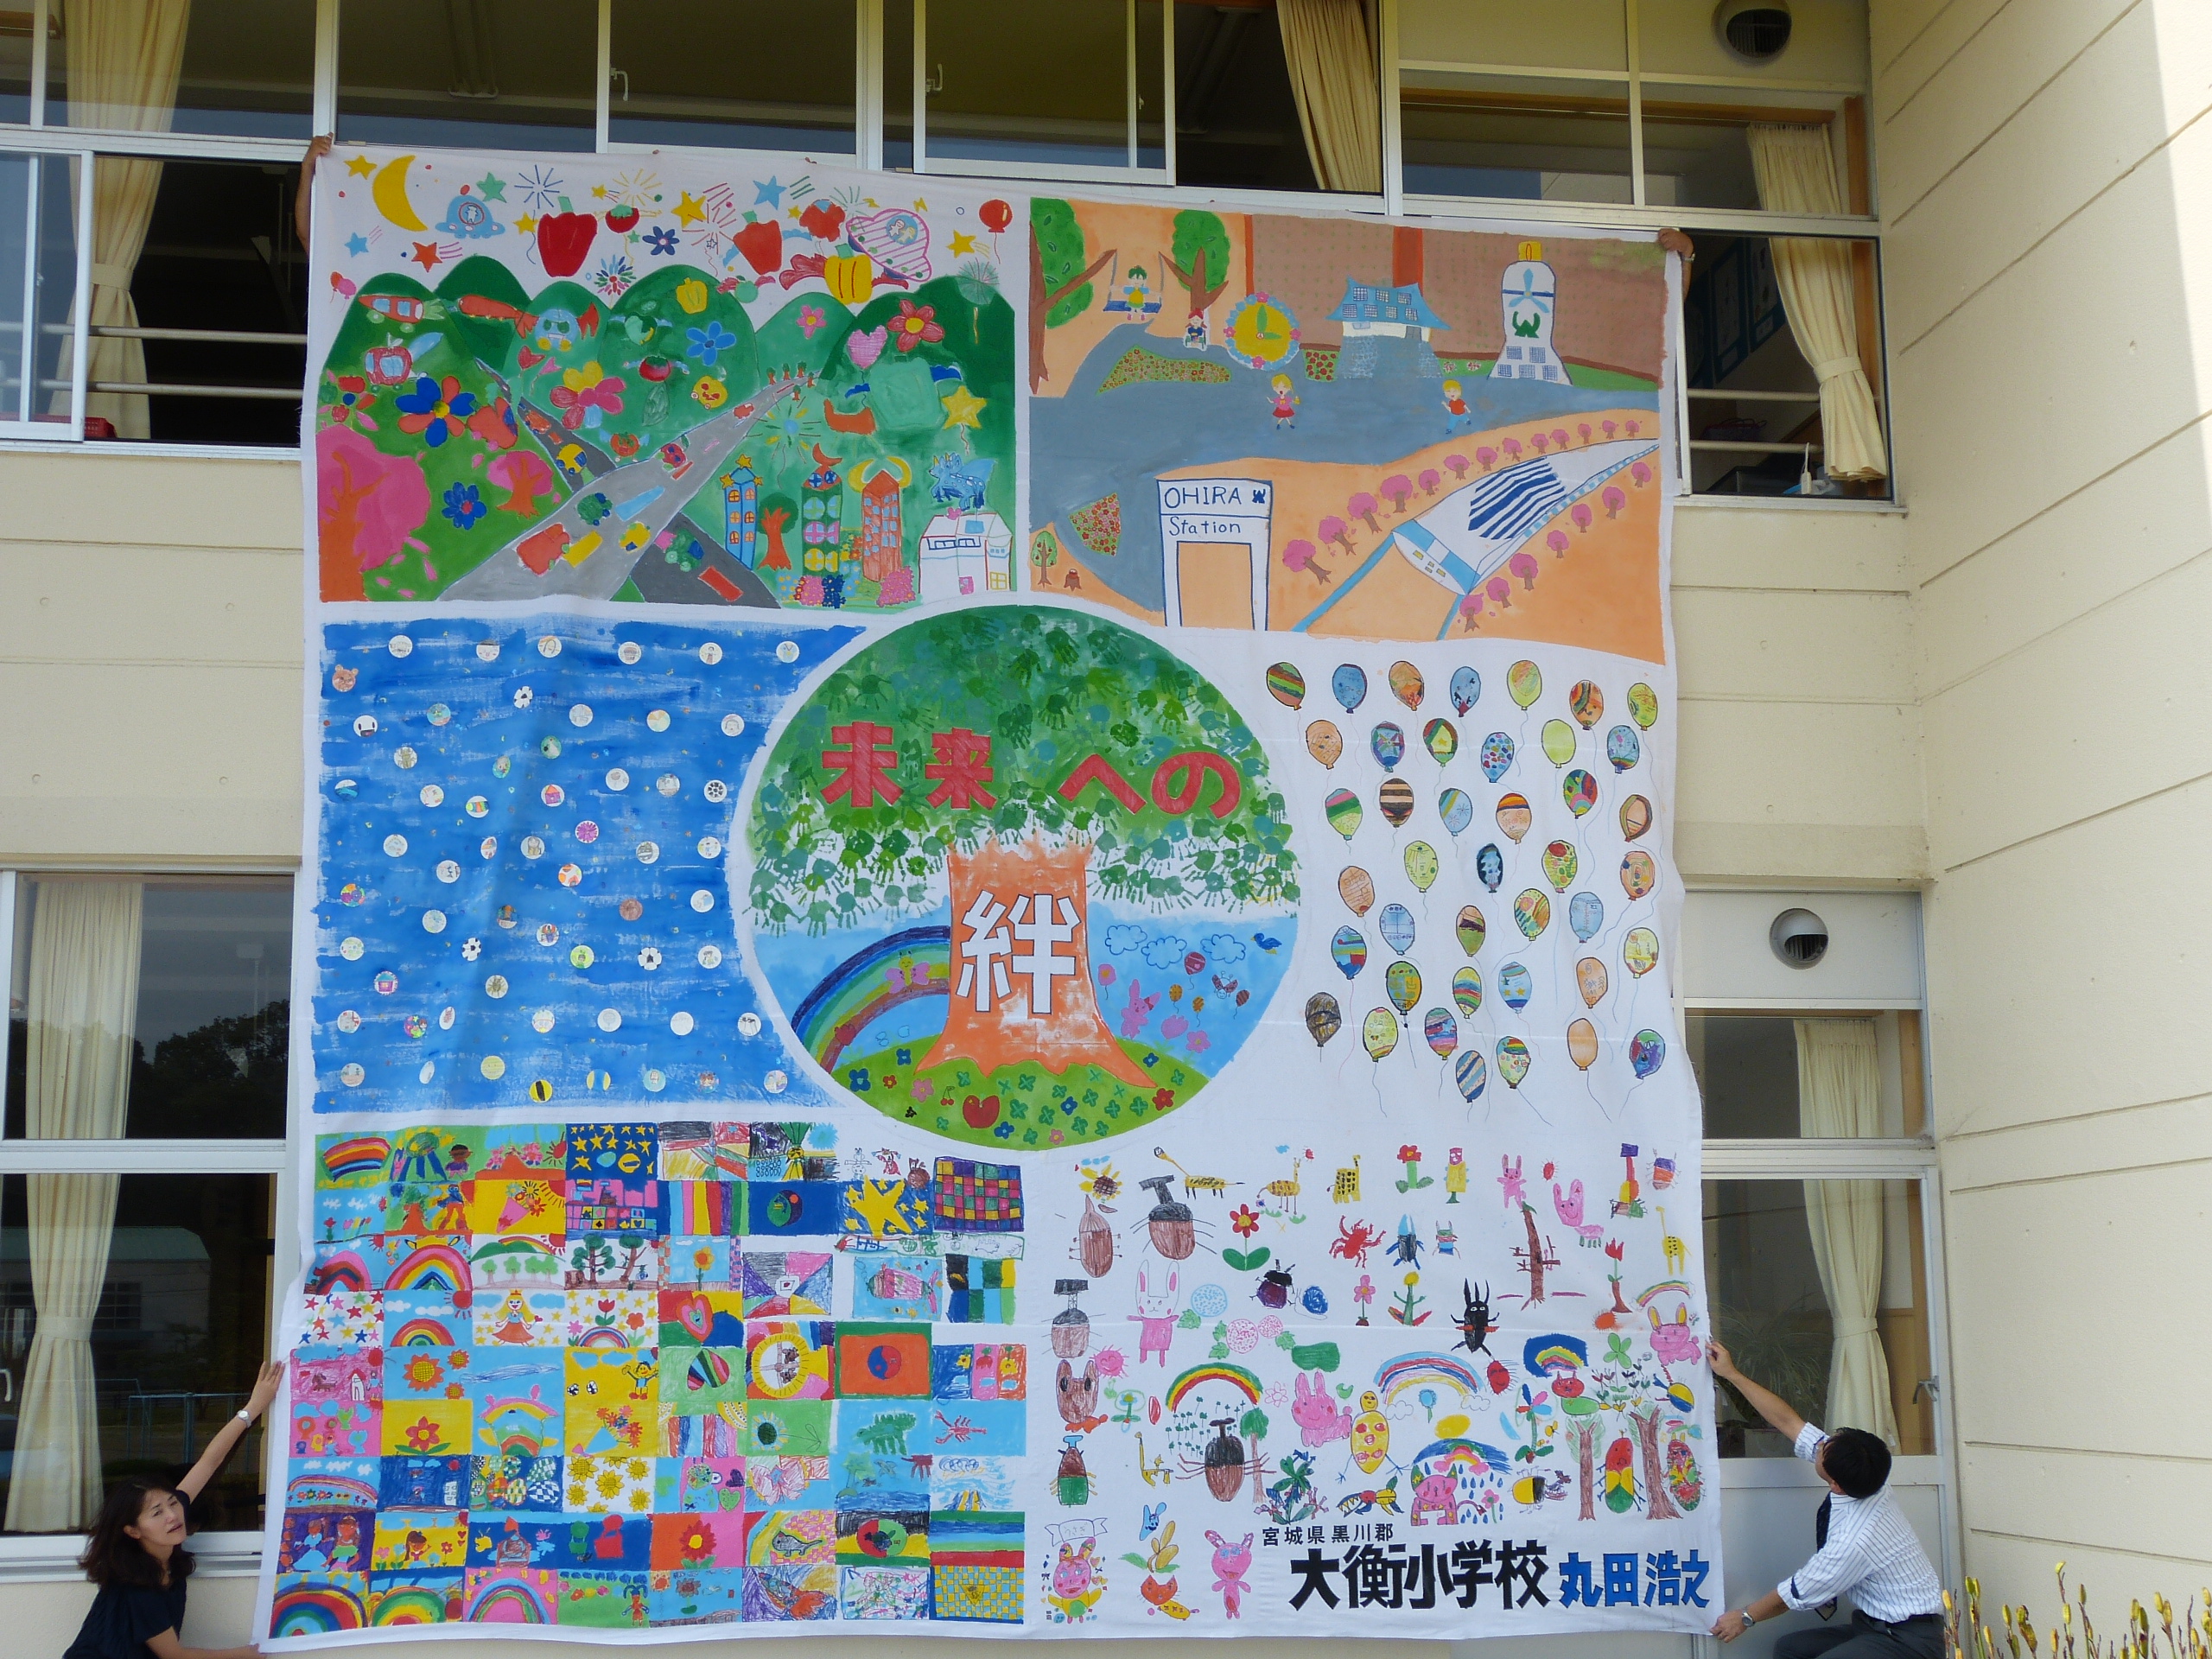 The Biggest Painting in the World 2020 Ohira Village was completed